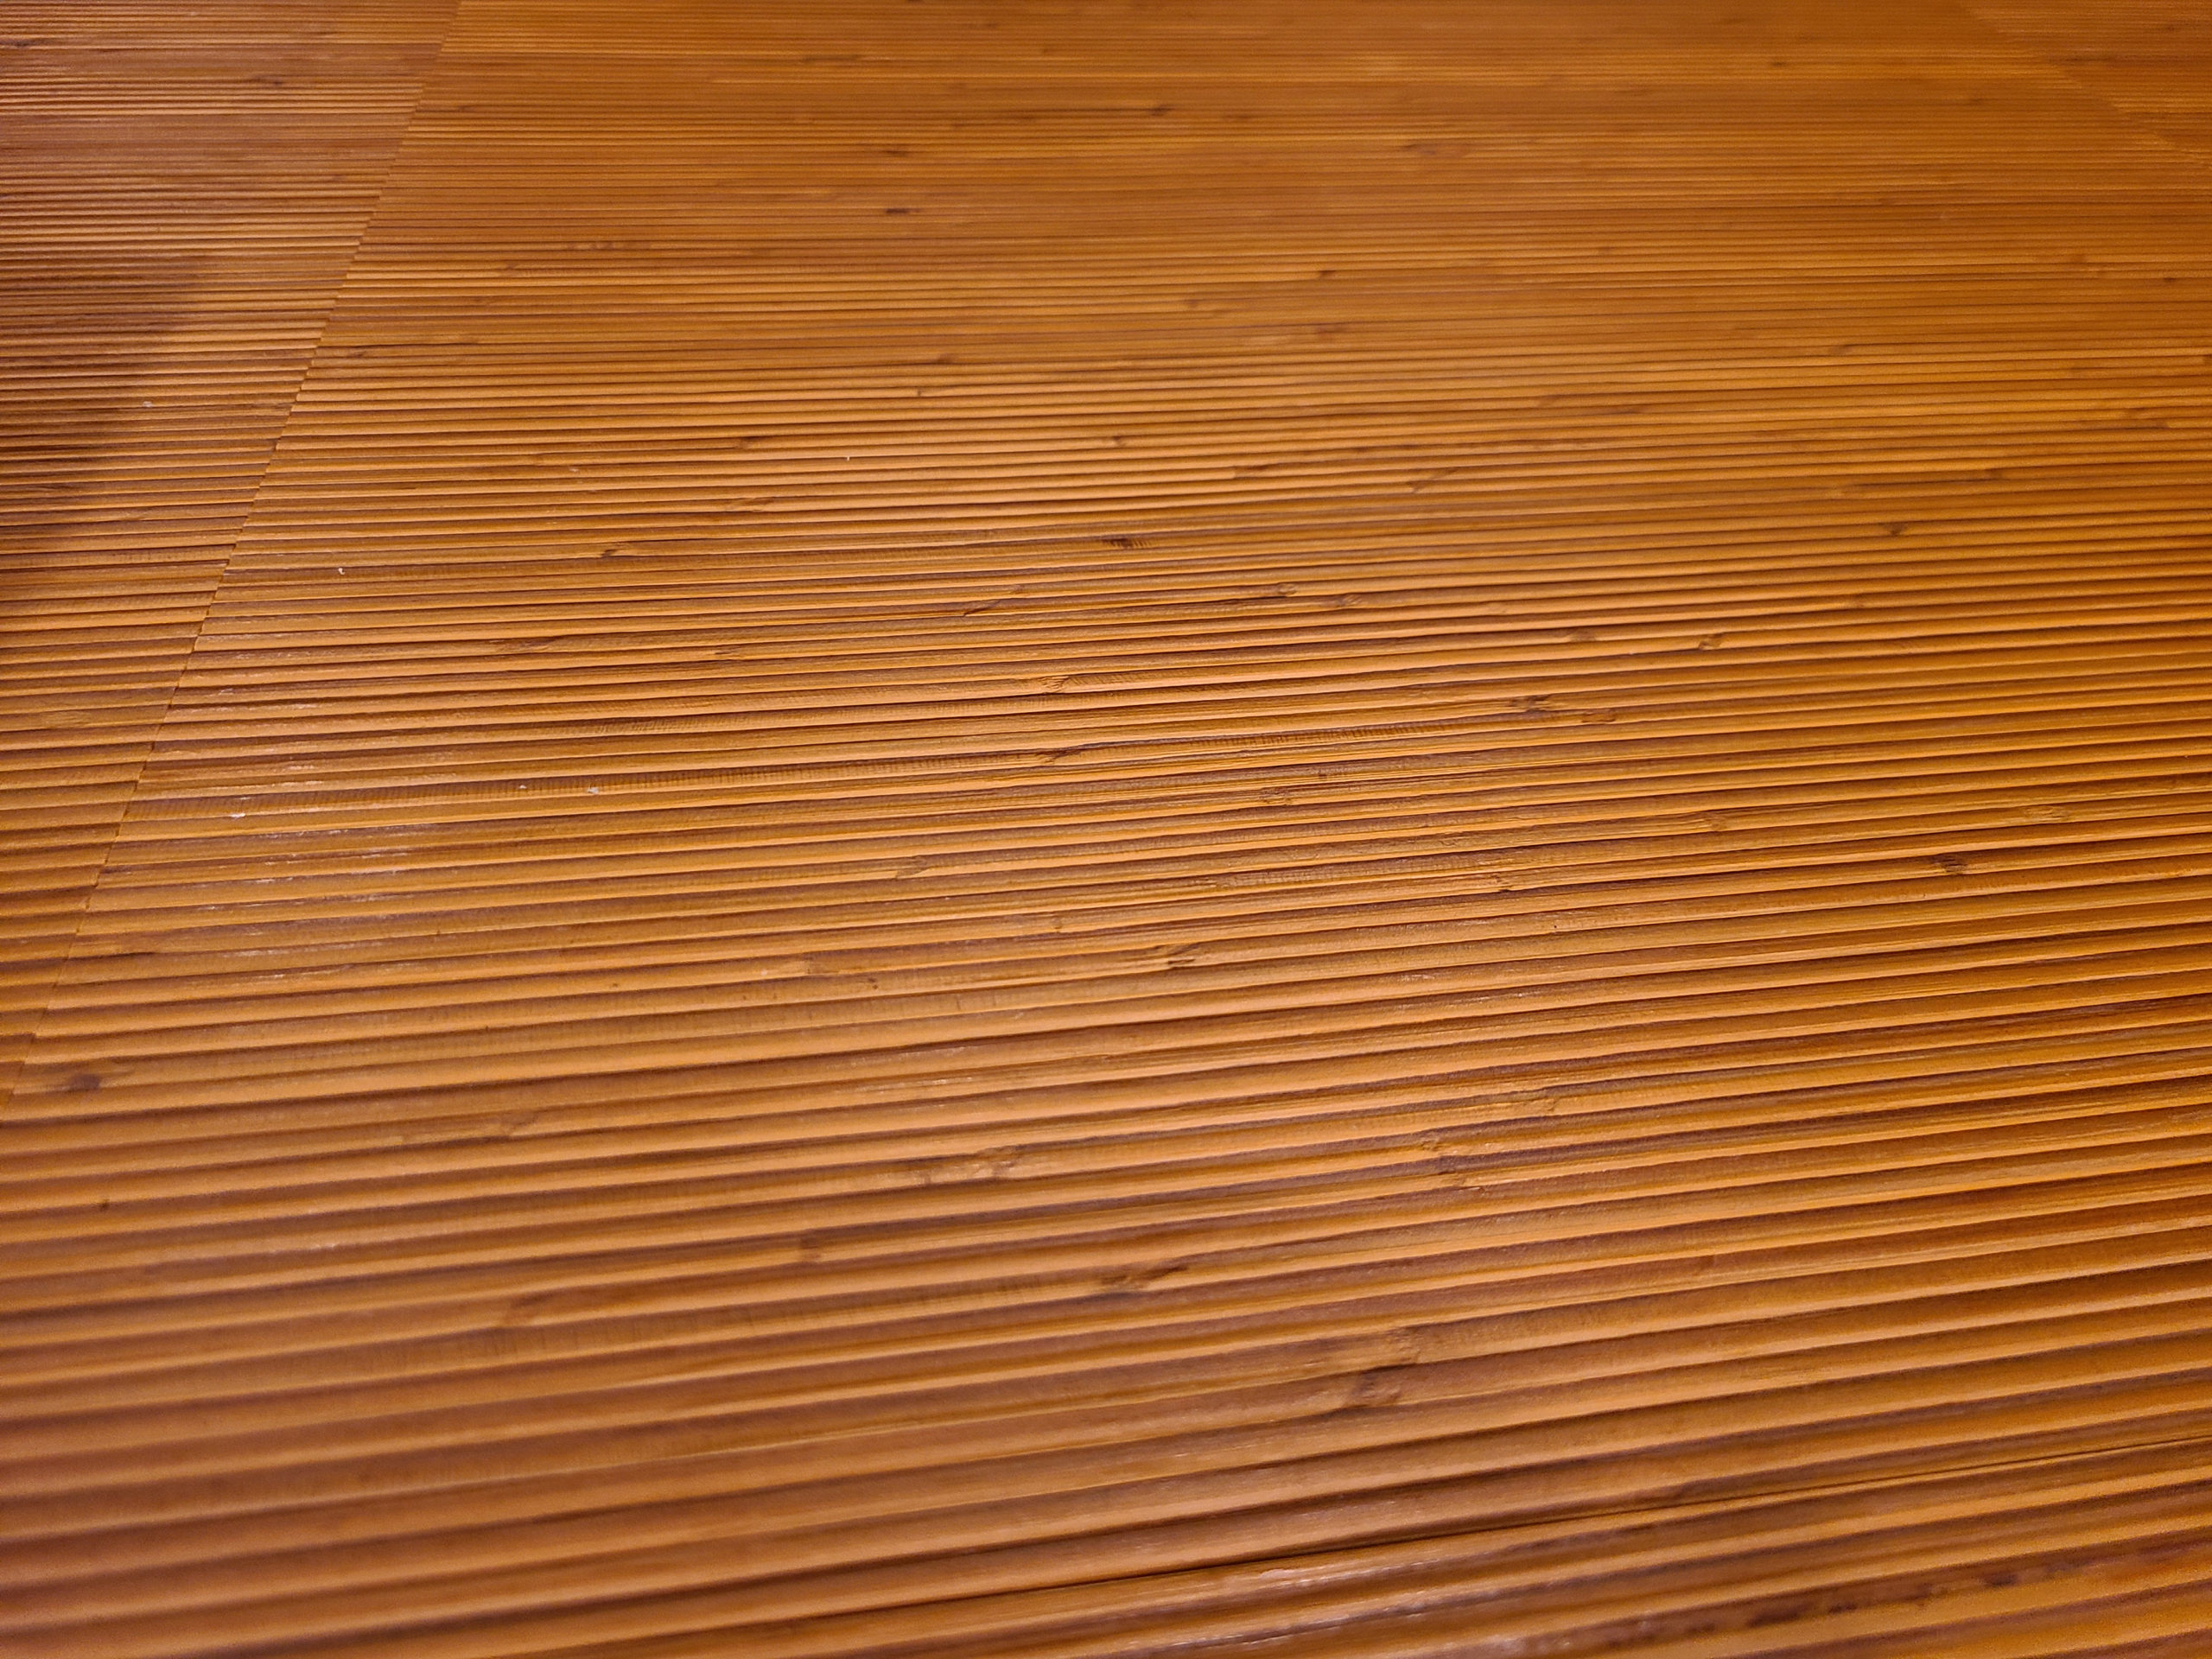 Extra care has been put into the choice of flooring, ridged wood, which has a pleasant feel under bare feet